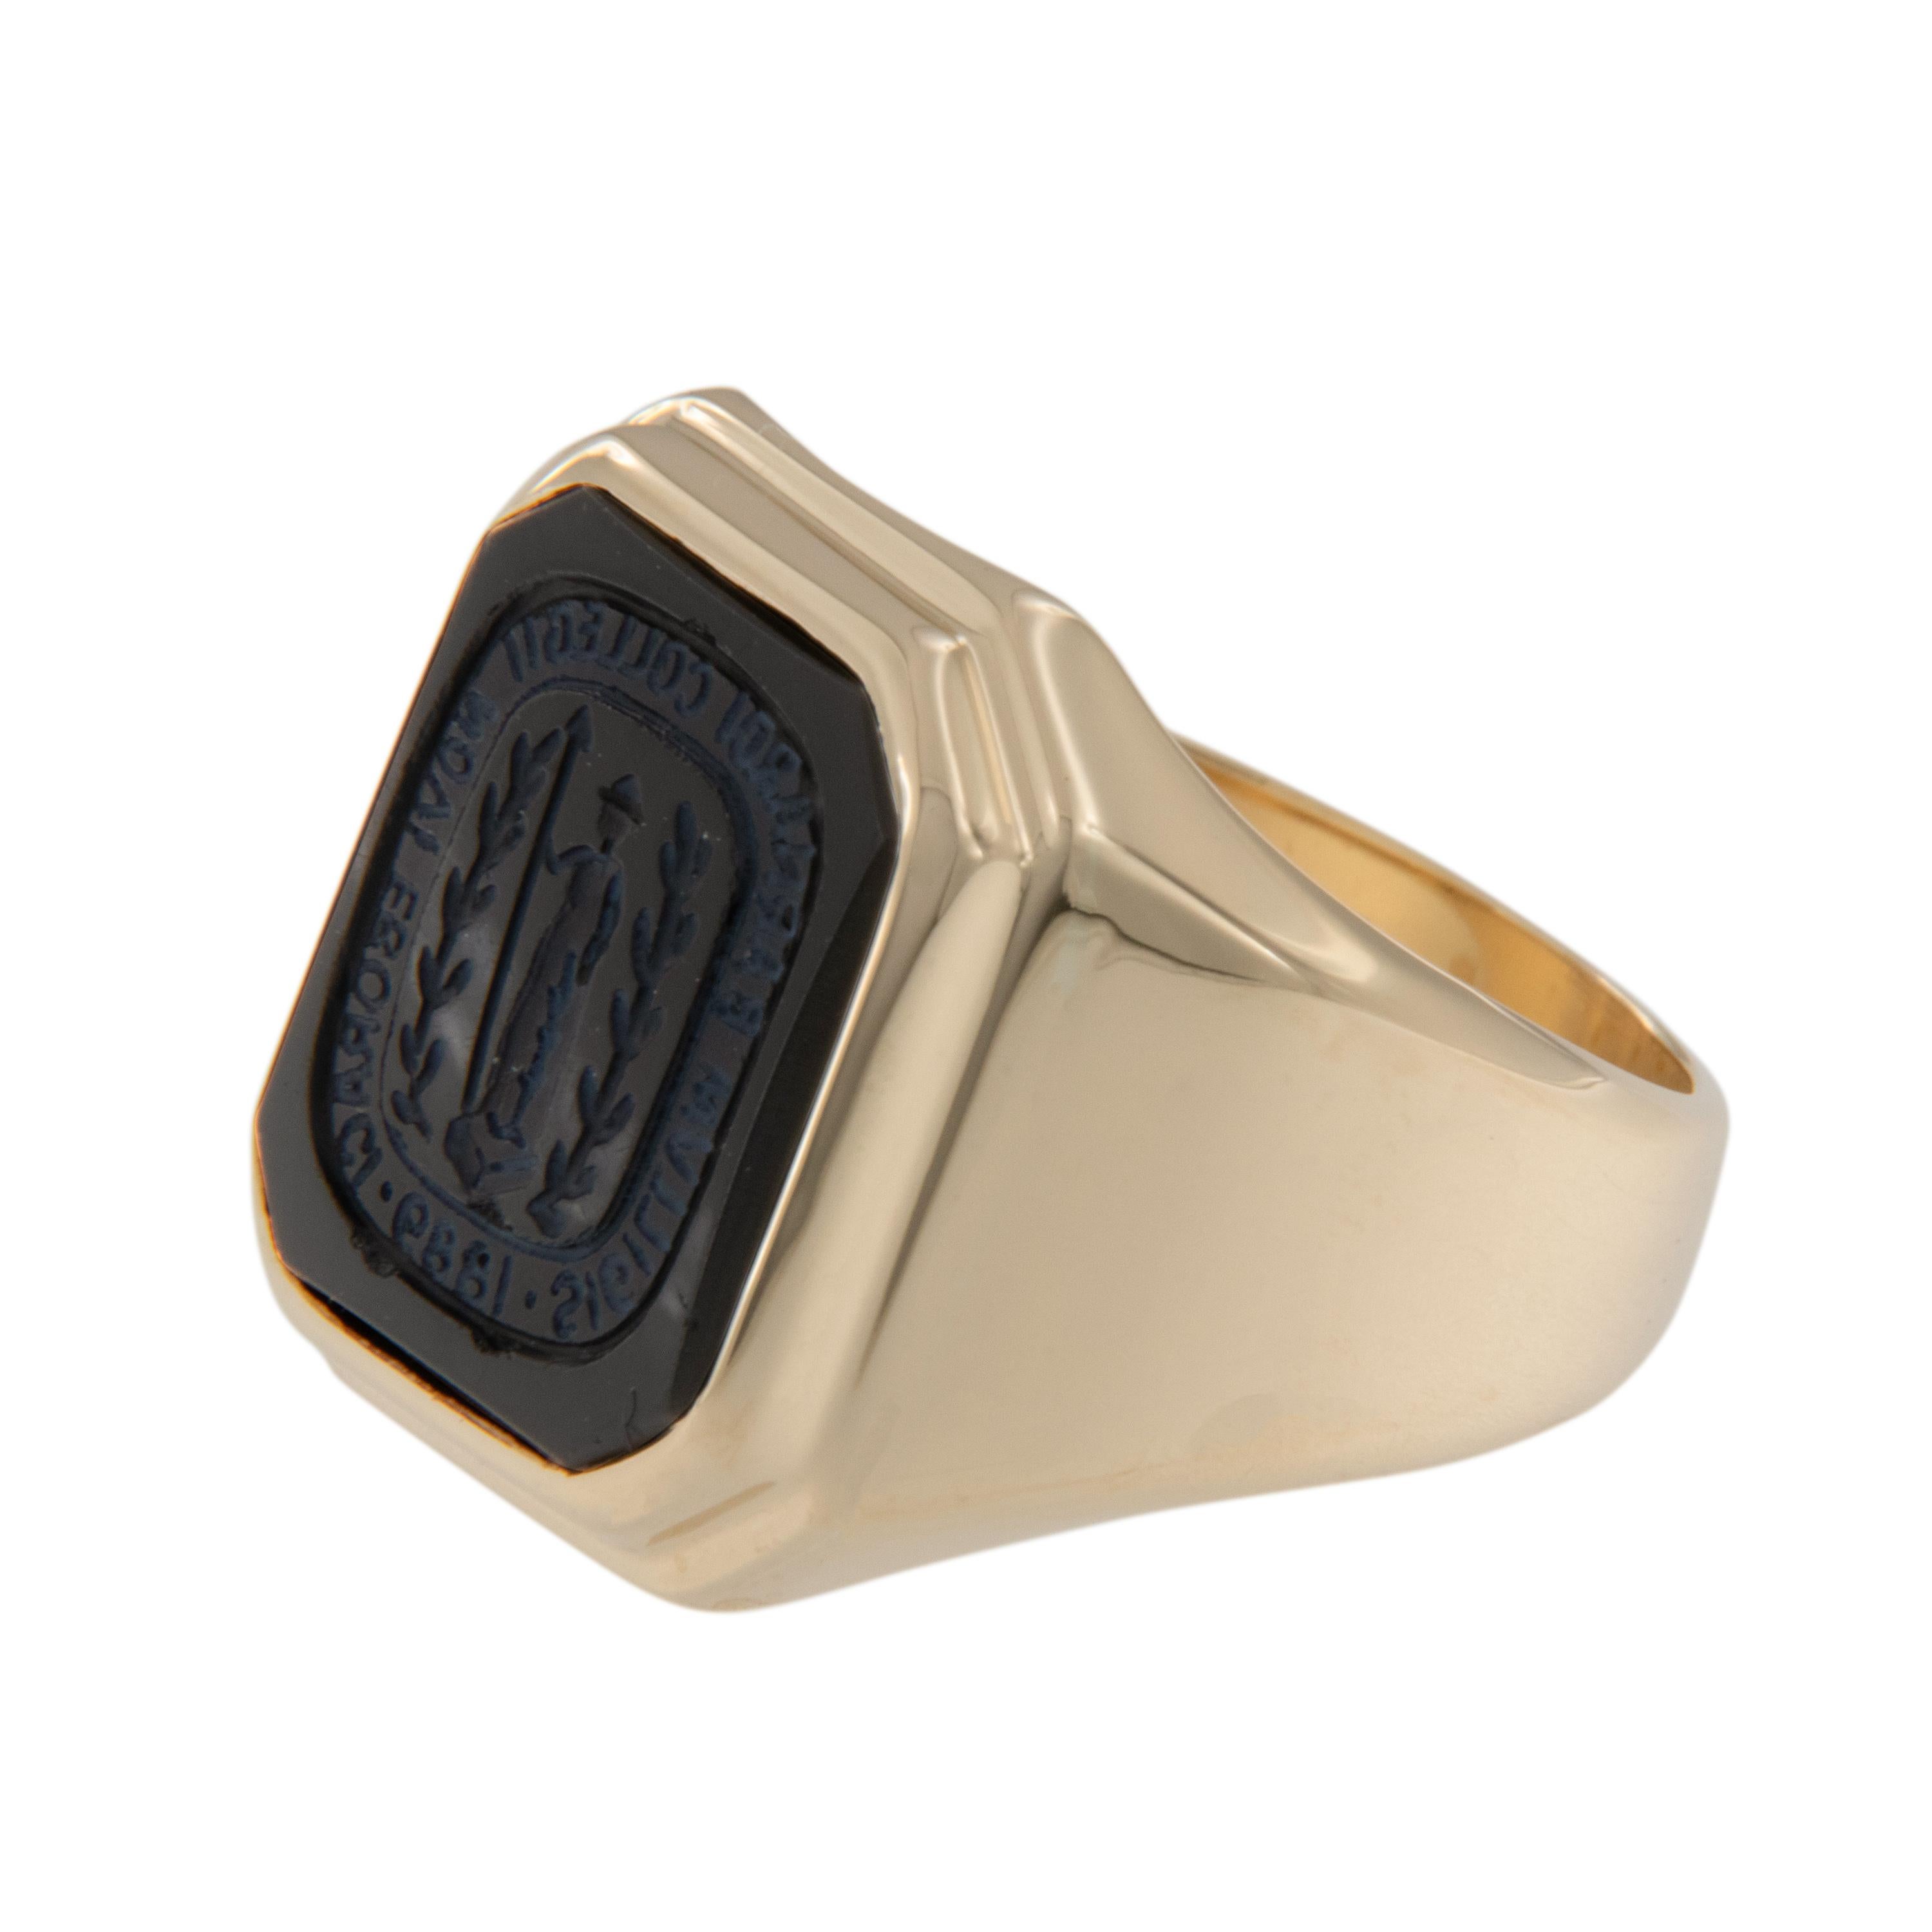 Barnard College, Columbia University, is a private women's liberal arts college in the borough of Manhattan. This vintage ring is in exceptional condition with the expertly carved black onyx having fine detail. The Columbia University seal was